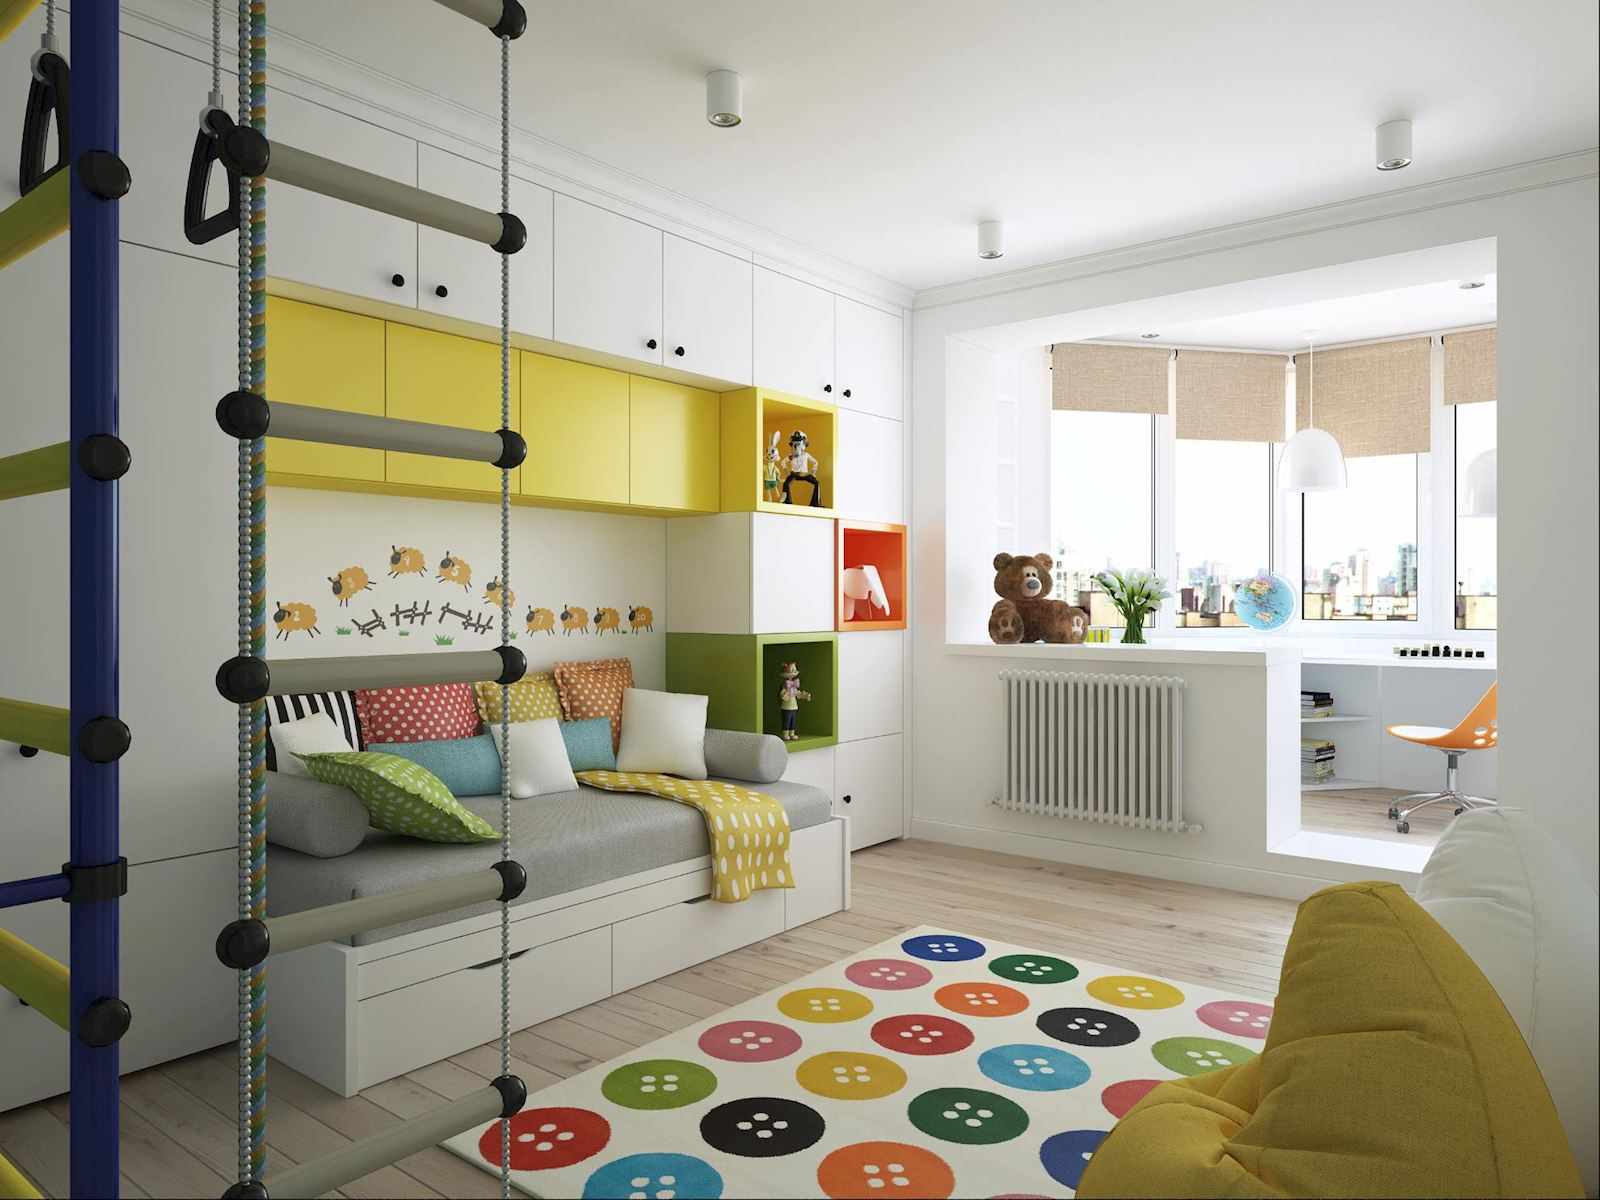 version of the unusual design of the children's room